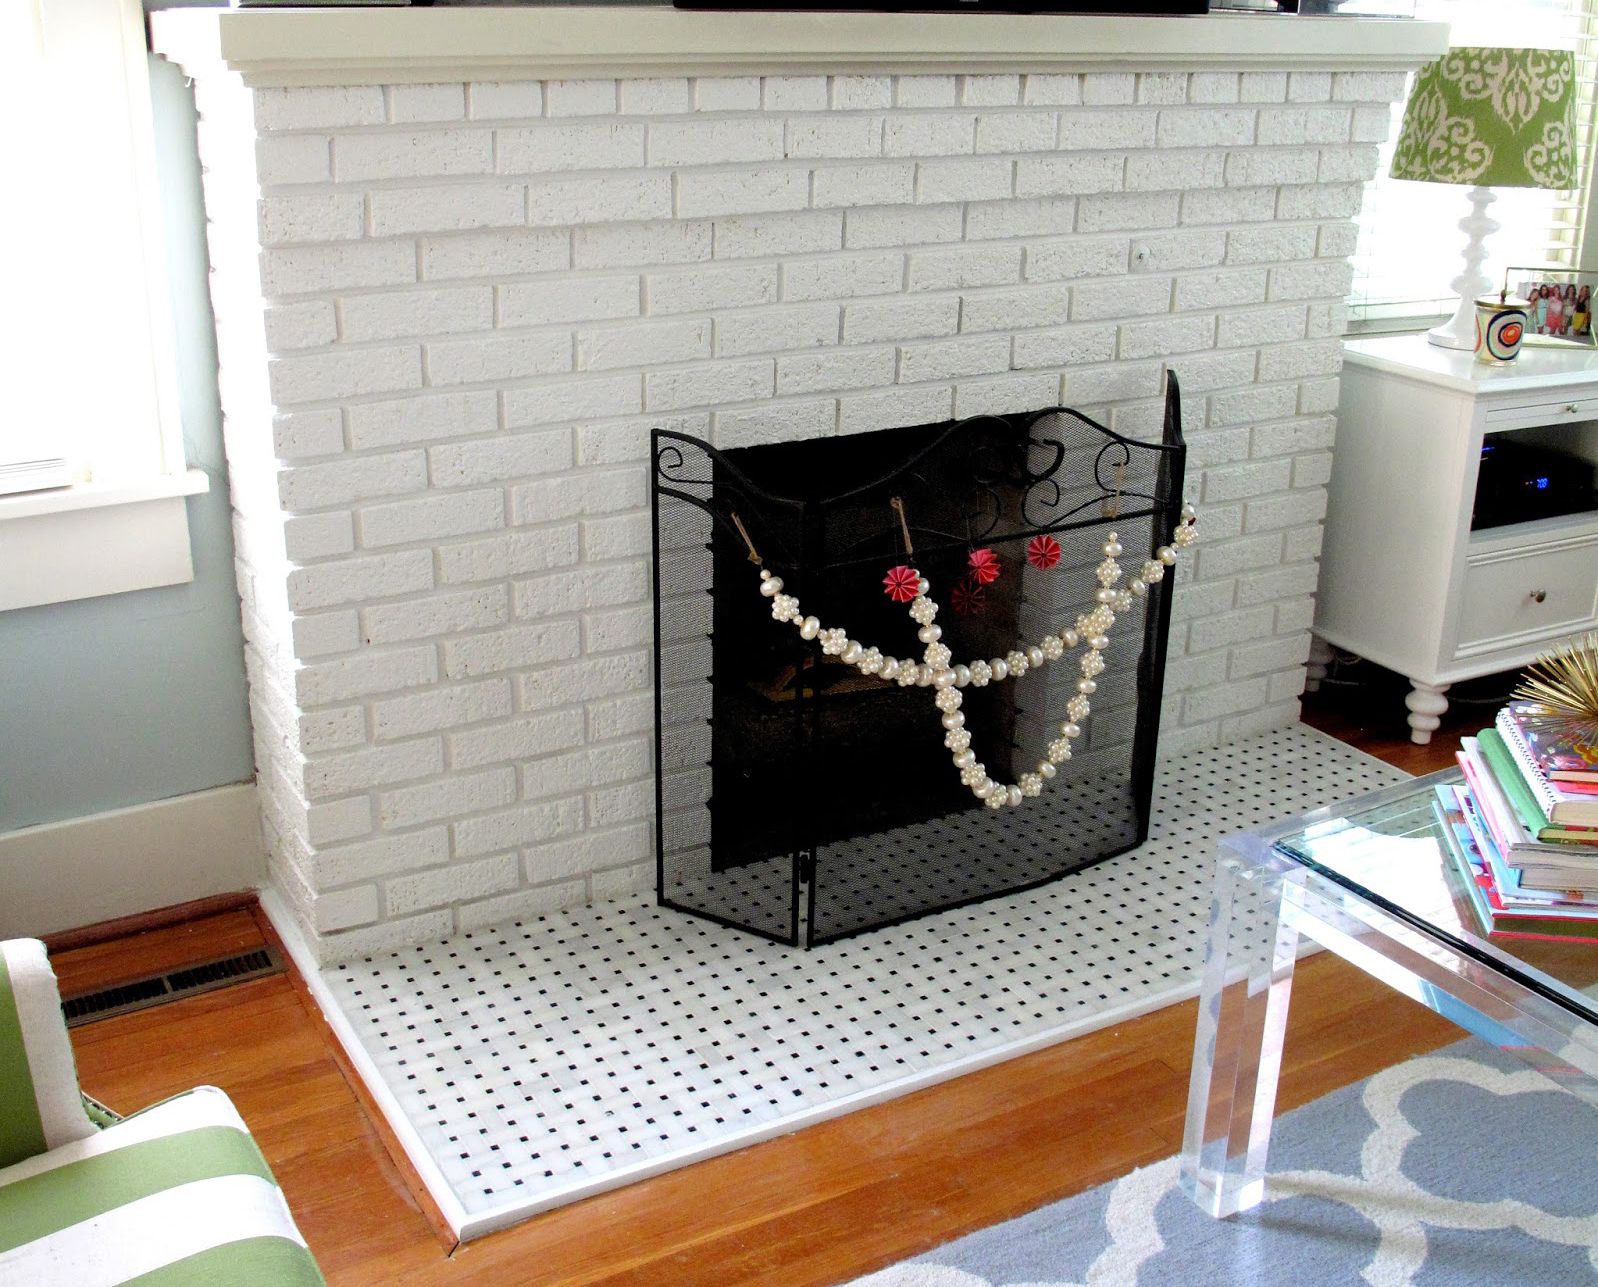 These fireplaces with beautiful tile will inspire you to create a hearthside worthy of cozying up to year around.